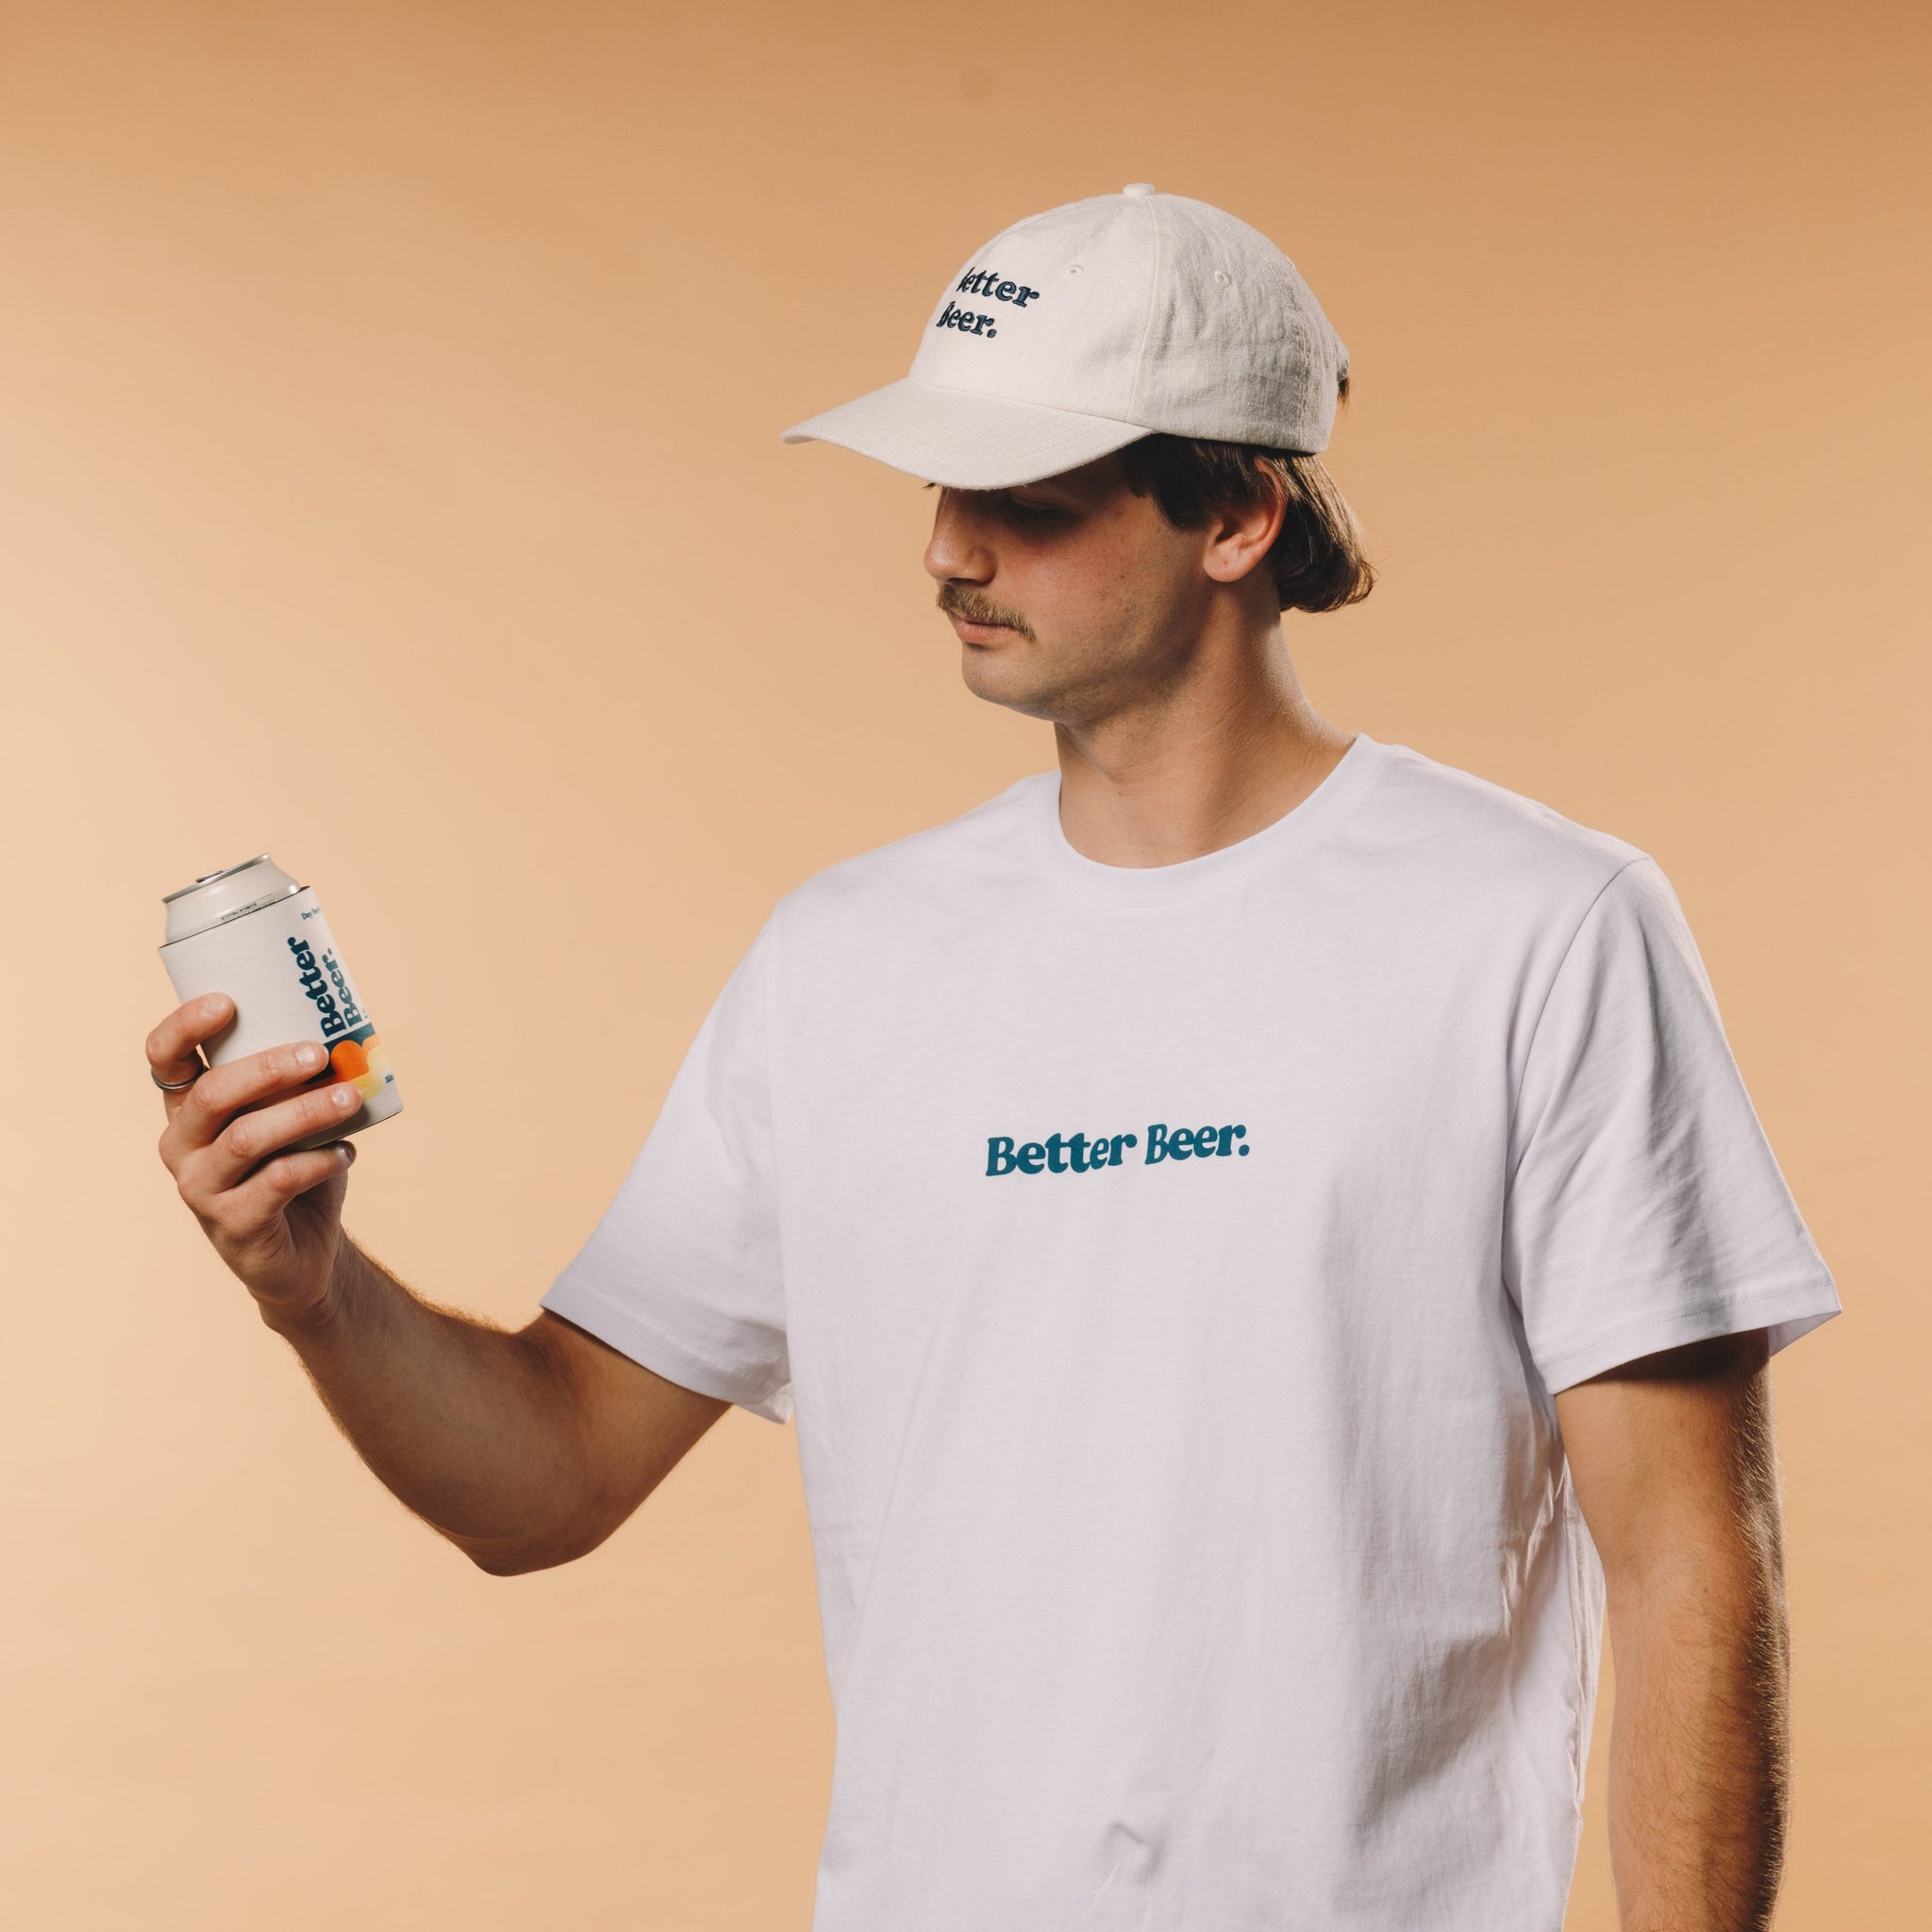 Sunrise Tinny Cooler features hemp caps and white tee - Better Beer